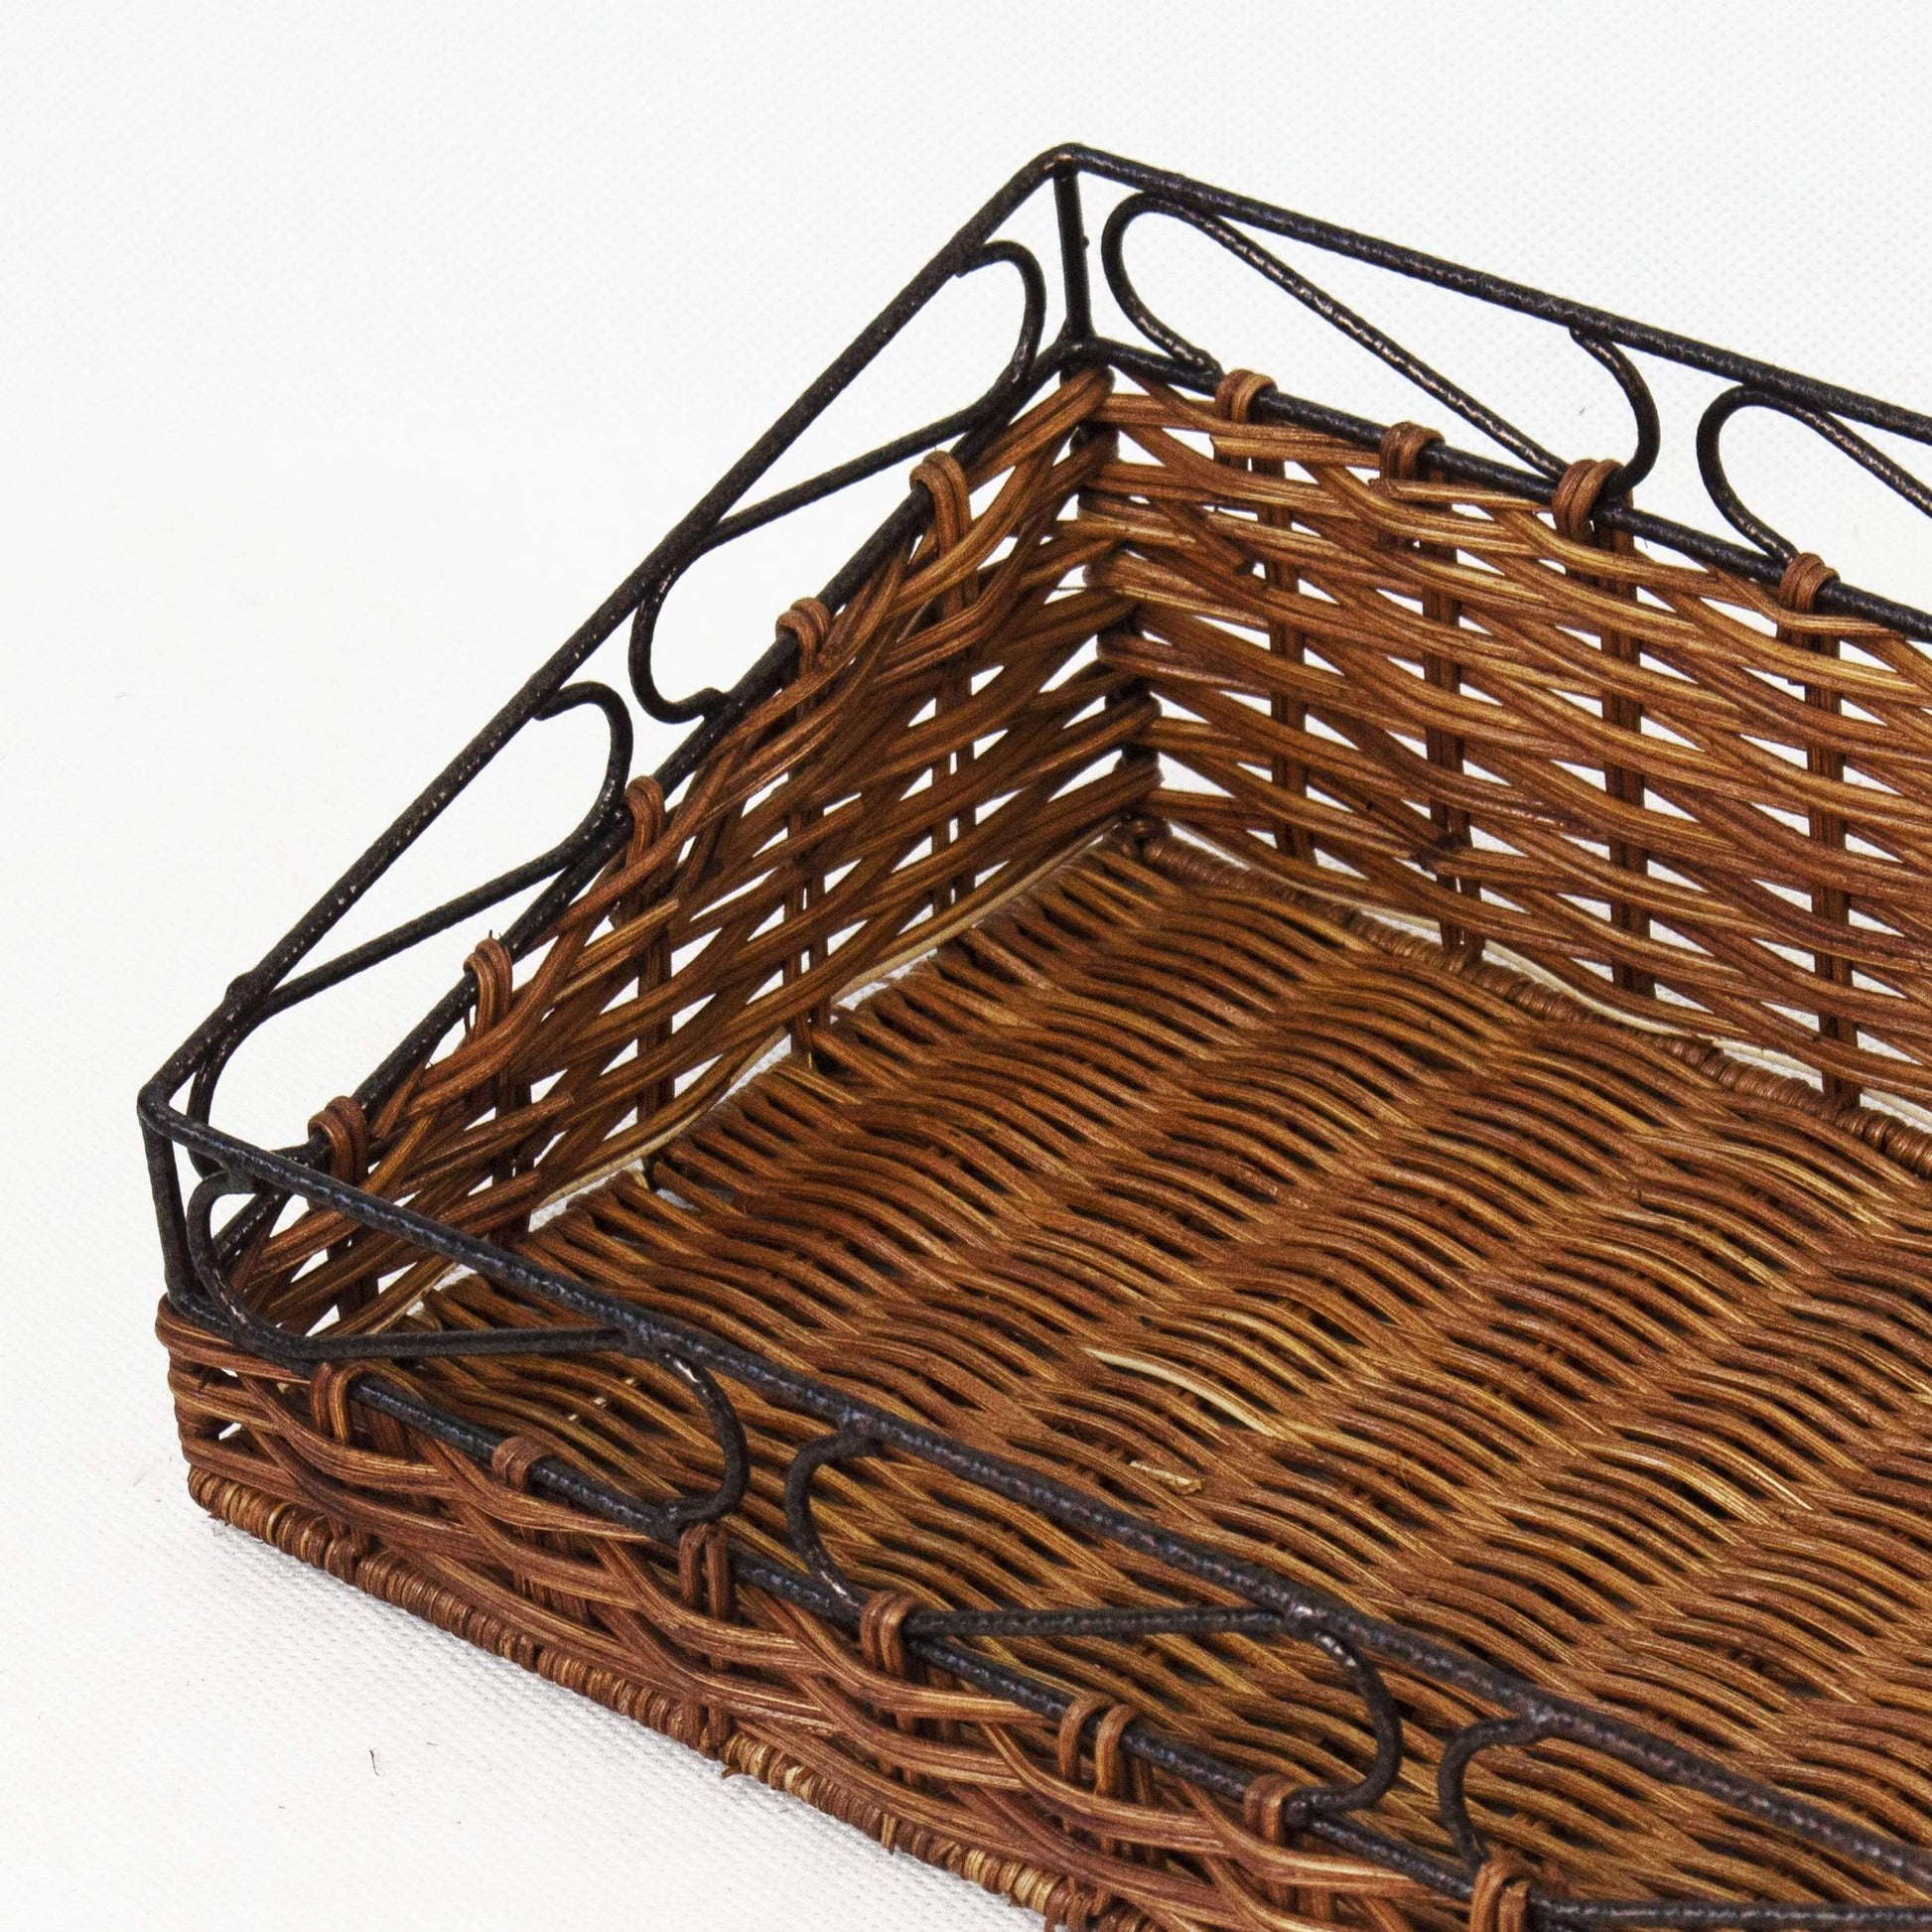 Wicker Storage Wall-hanging Tray With Metal Frame | Rustic Wall Hanging Storage Racks for Bathroom Decor and Home Storage - Almondscove